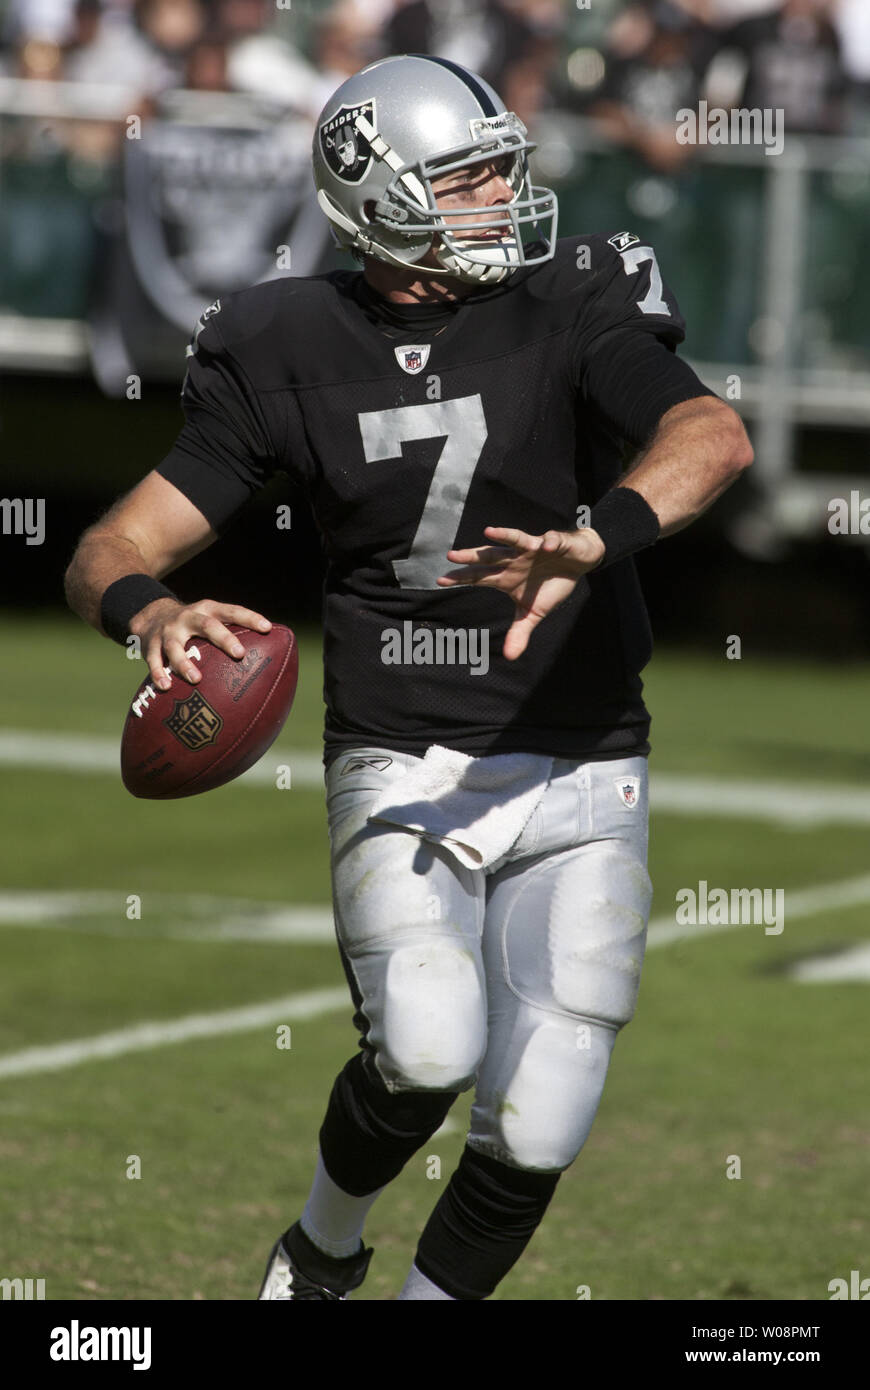 Oakland Raiders QB Kyle Boller (7) looks for a receiver in the first half against the Kansas City Chiefs at the O.co Coliseum in Oakland, California on October 23, 2011. Boller threw three interceptions in the 28-0 loss to the Chiefs.   UPI/Terry Schmitt Stock Photo